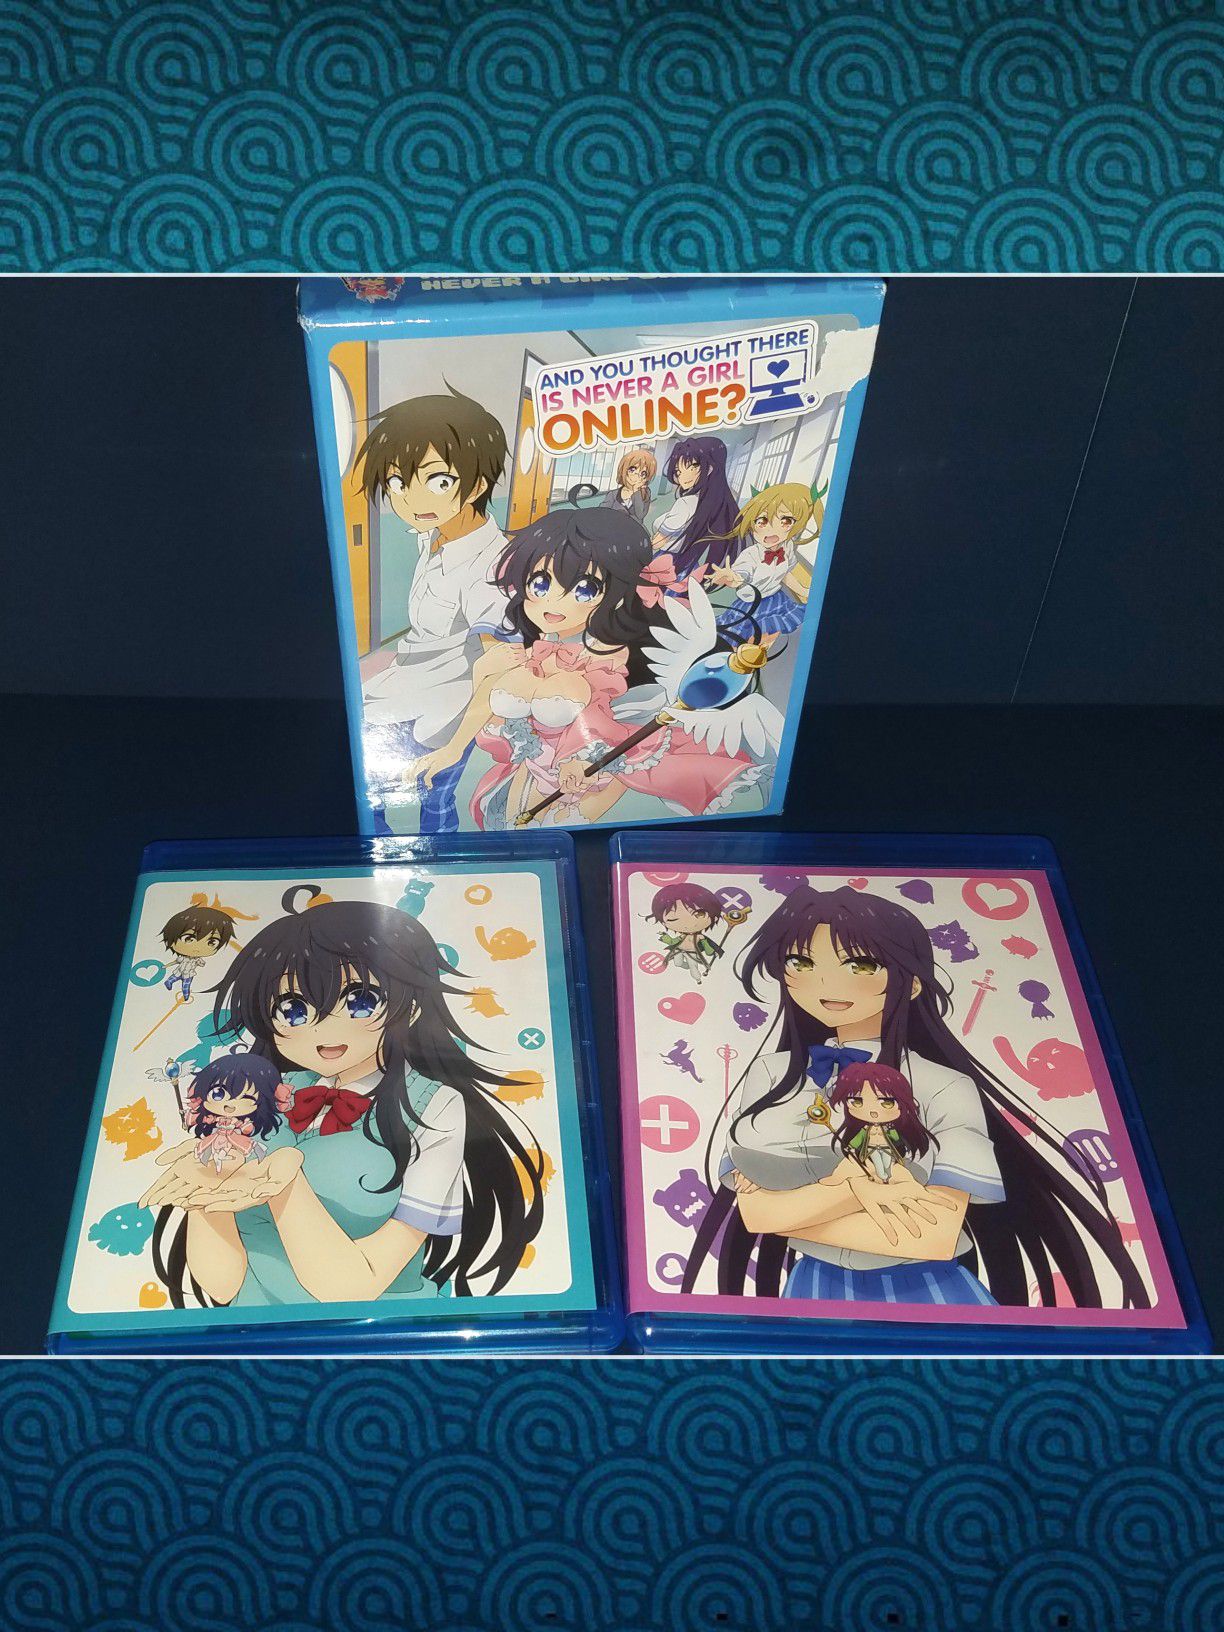 And You Thought There Is Never A Girl Online? Limited Edition Blu-ray & DVD Box Set Anime Funimation